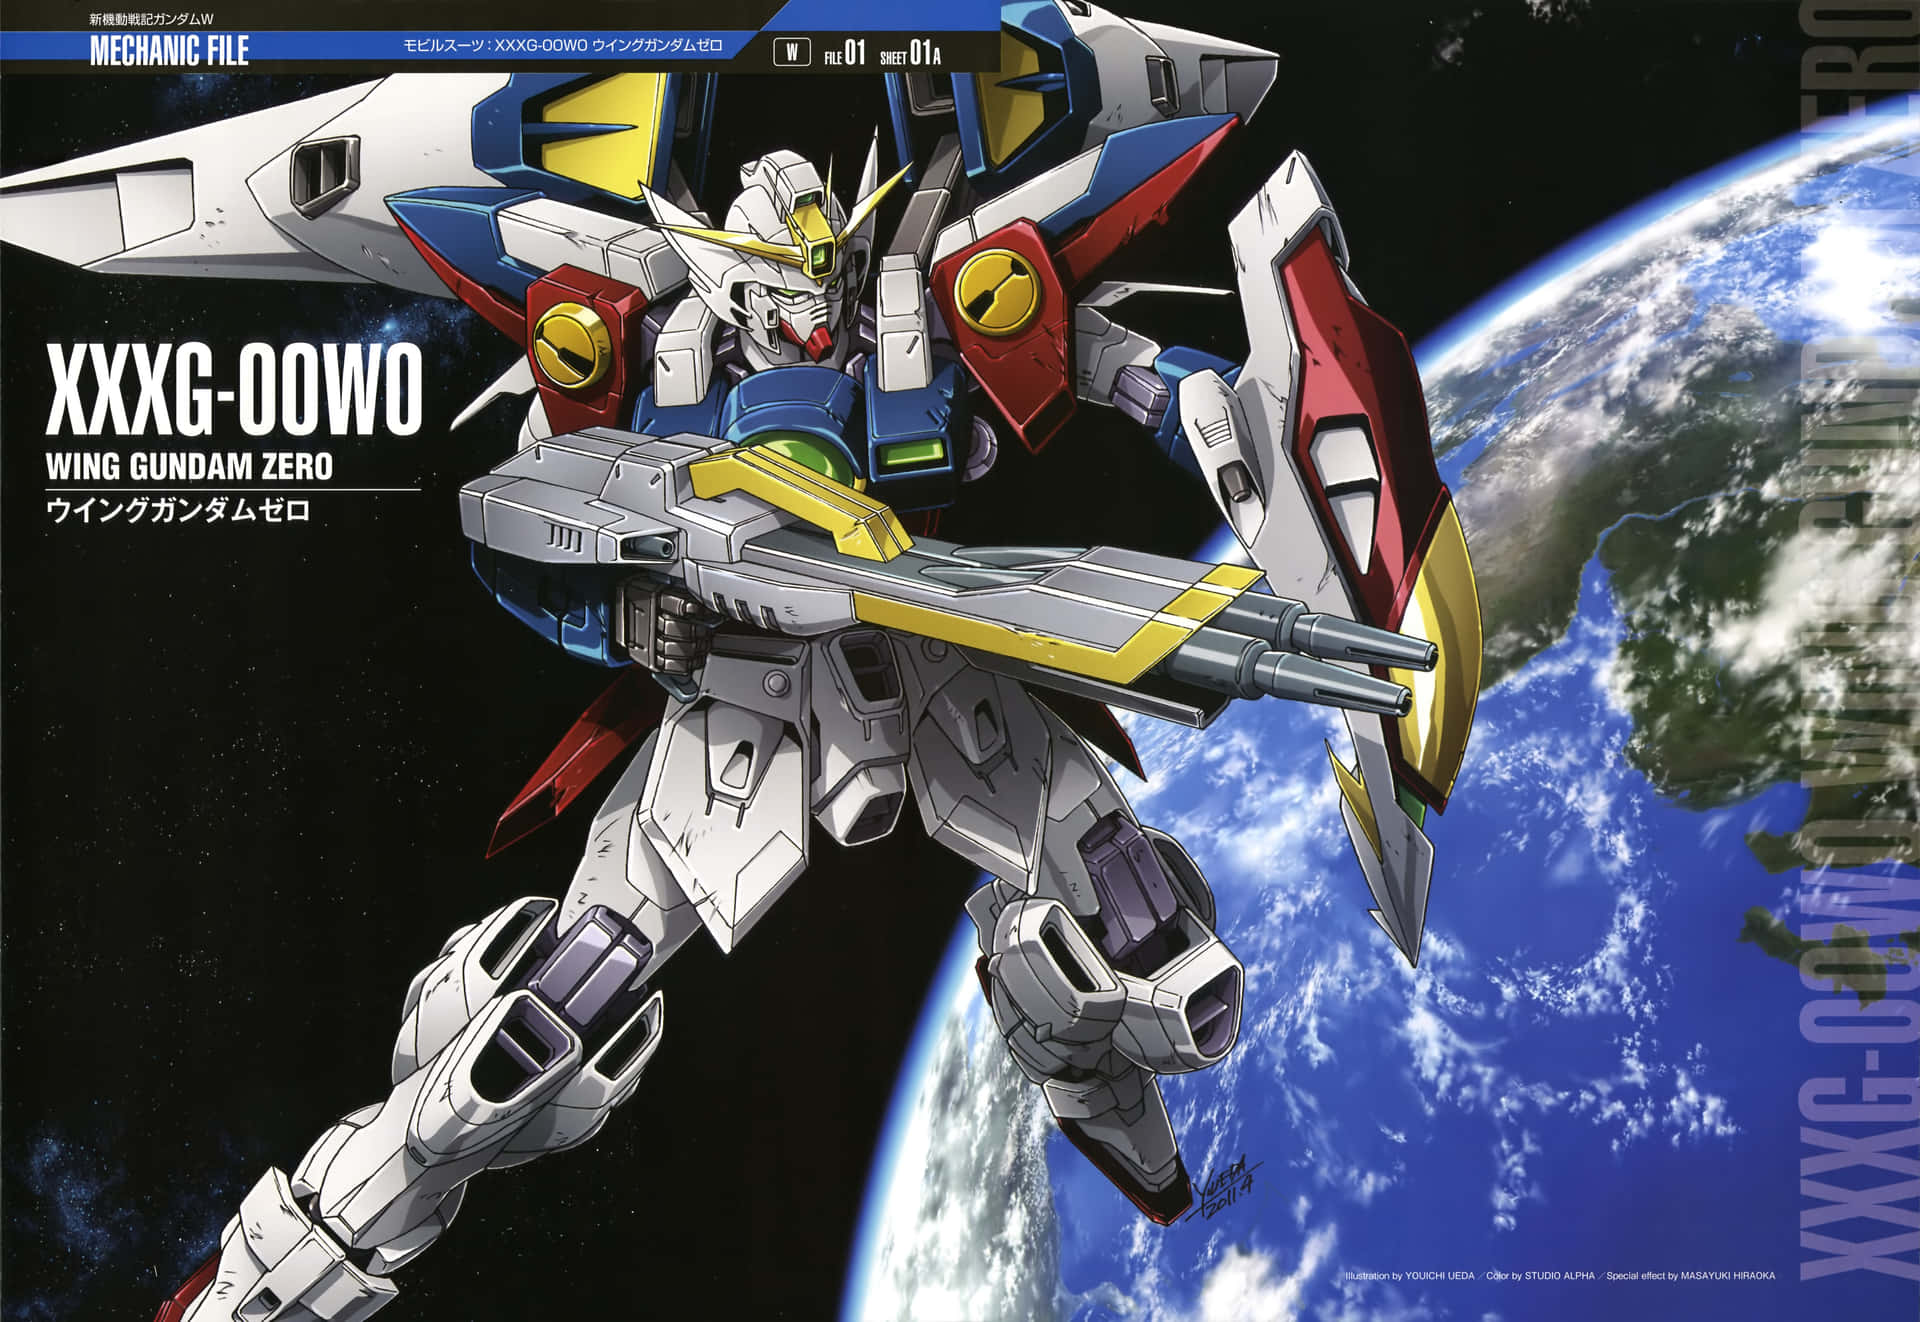 A powerful Mobile Suit pilot battles in the hit anime series, Gundam Wing Wallpaper